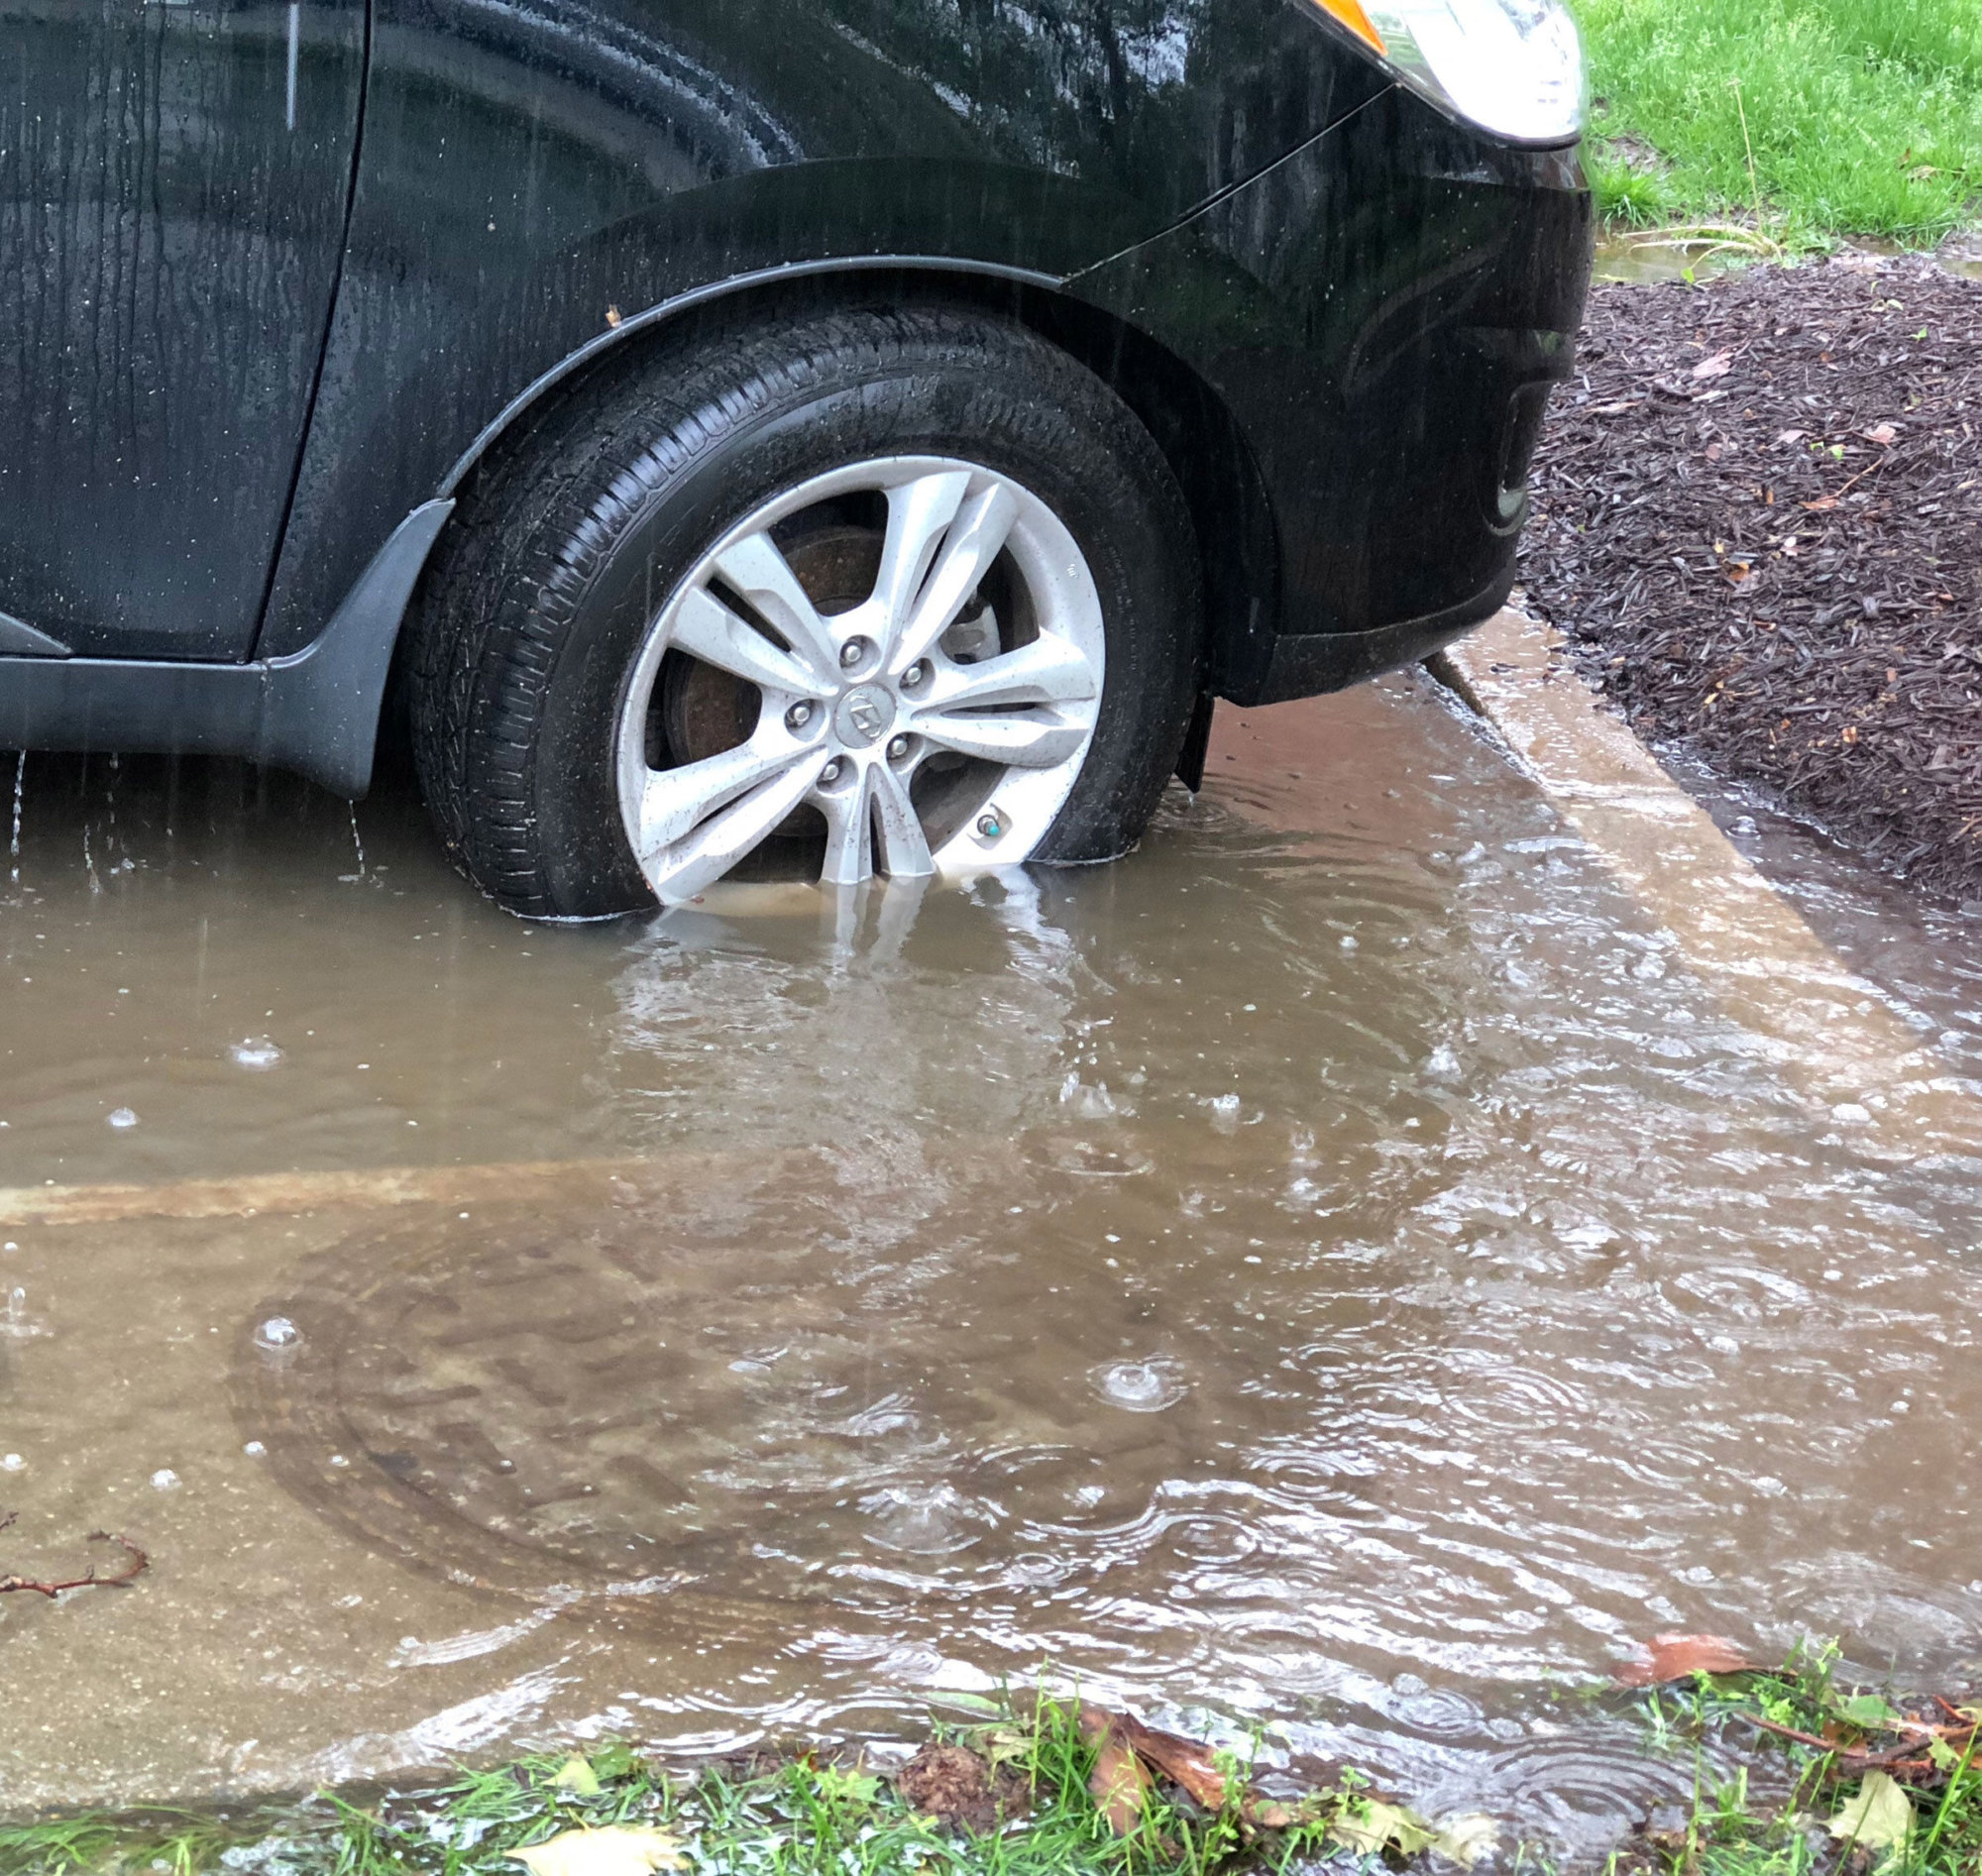 Storm drains in the area, including this one in D.C., are getting a workout Thursday, May 17, 2018. (WTOP/Kate Ryan)